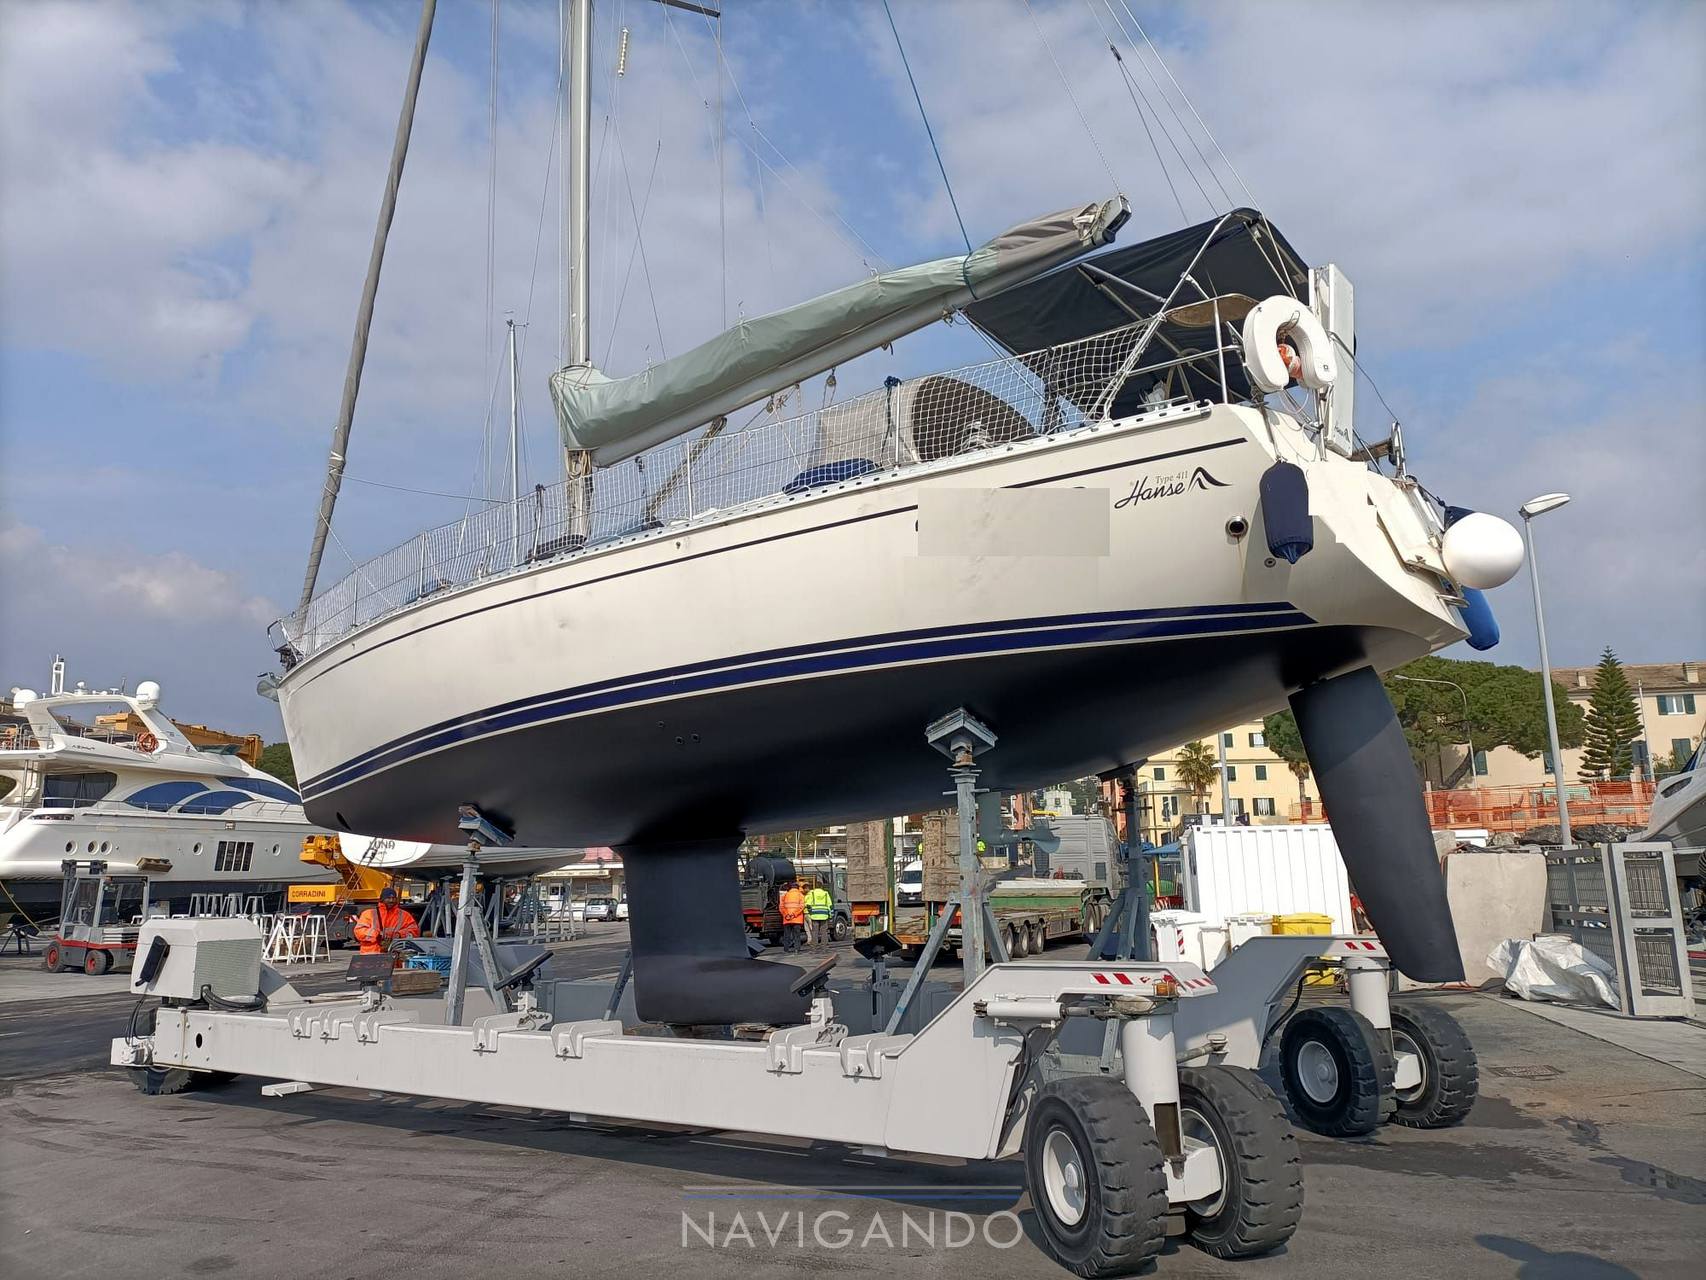 Hanse 411 Sailing boat used for sale